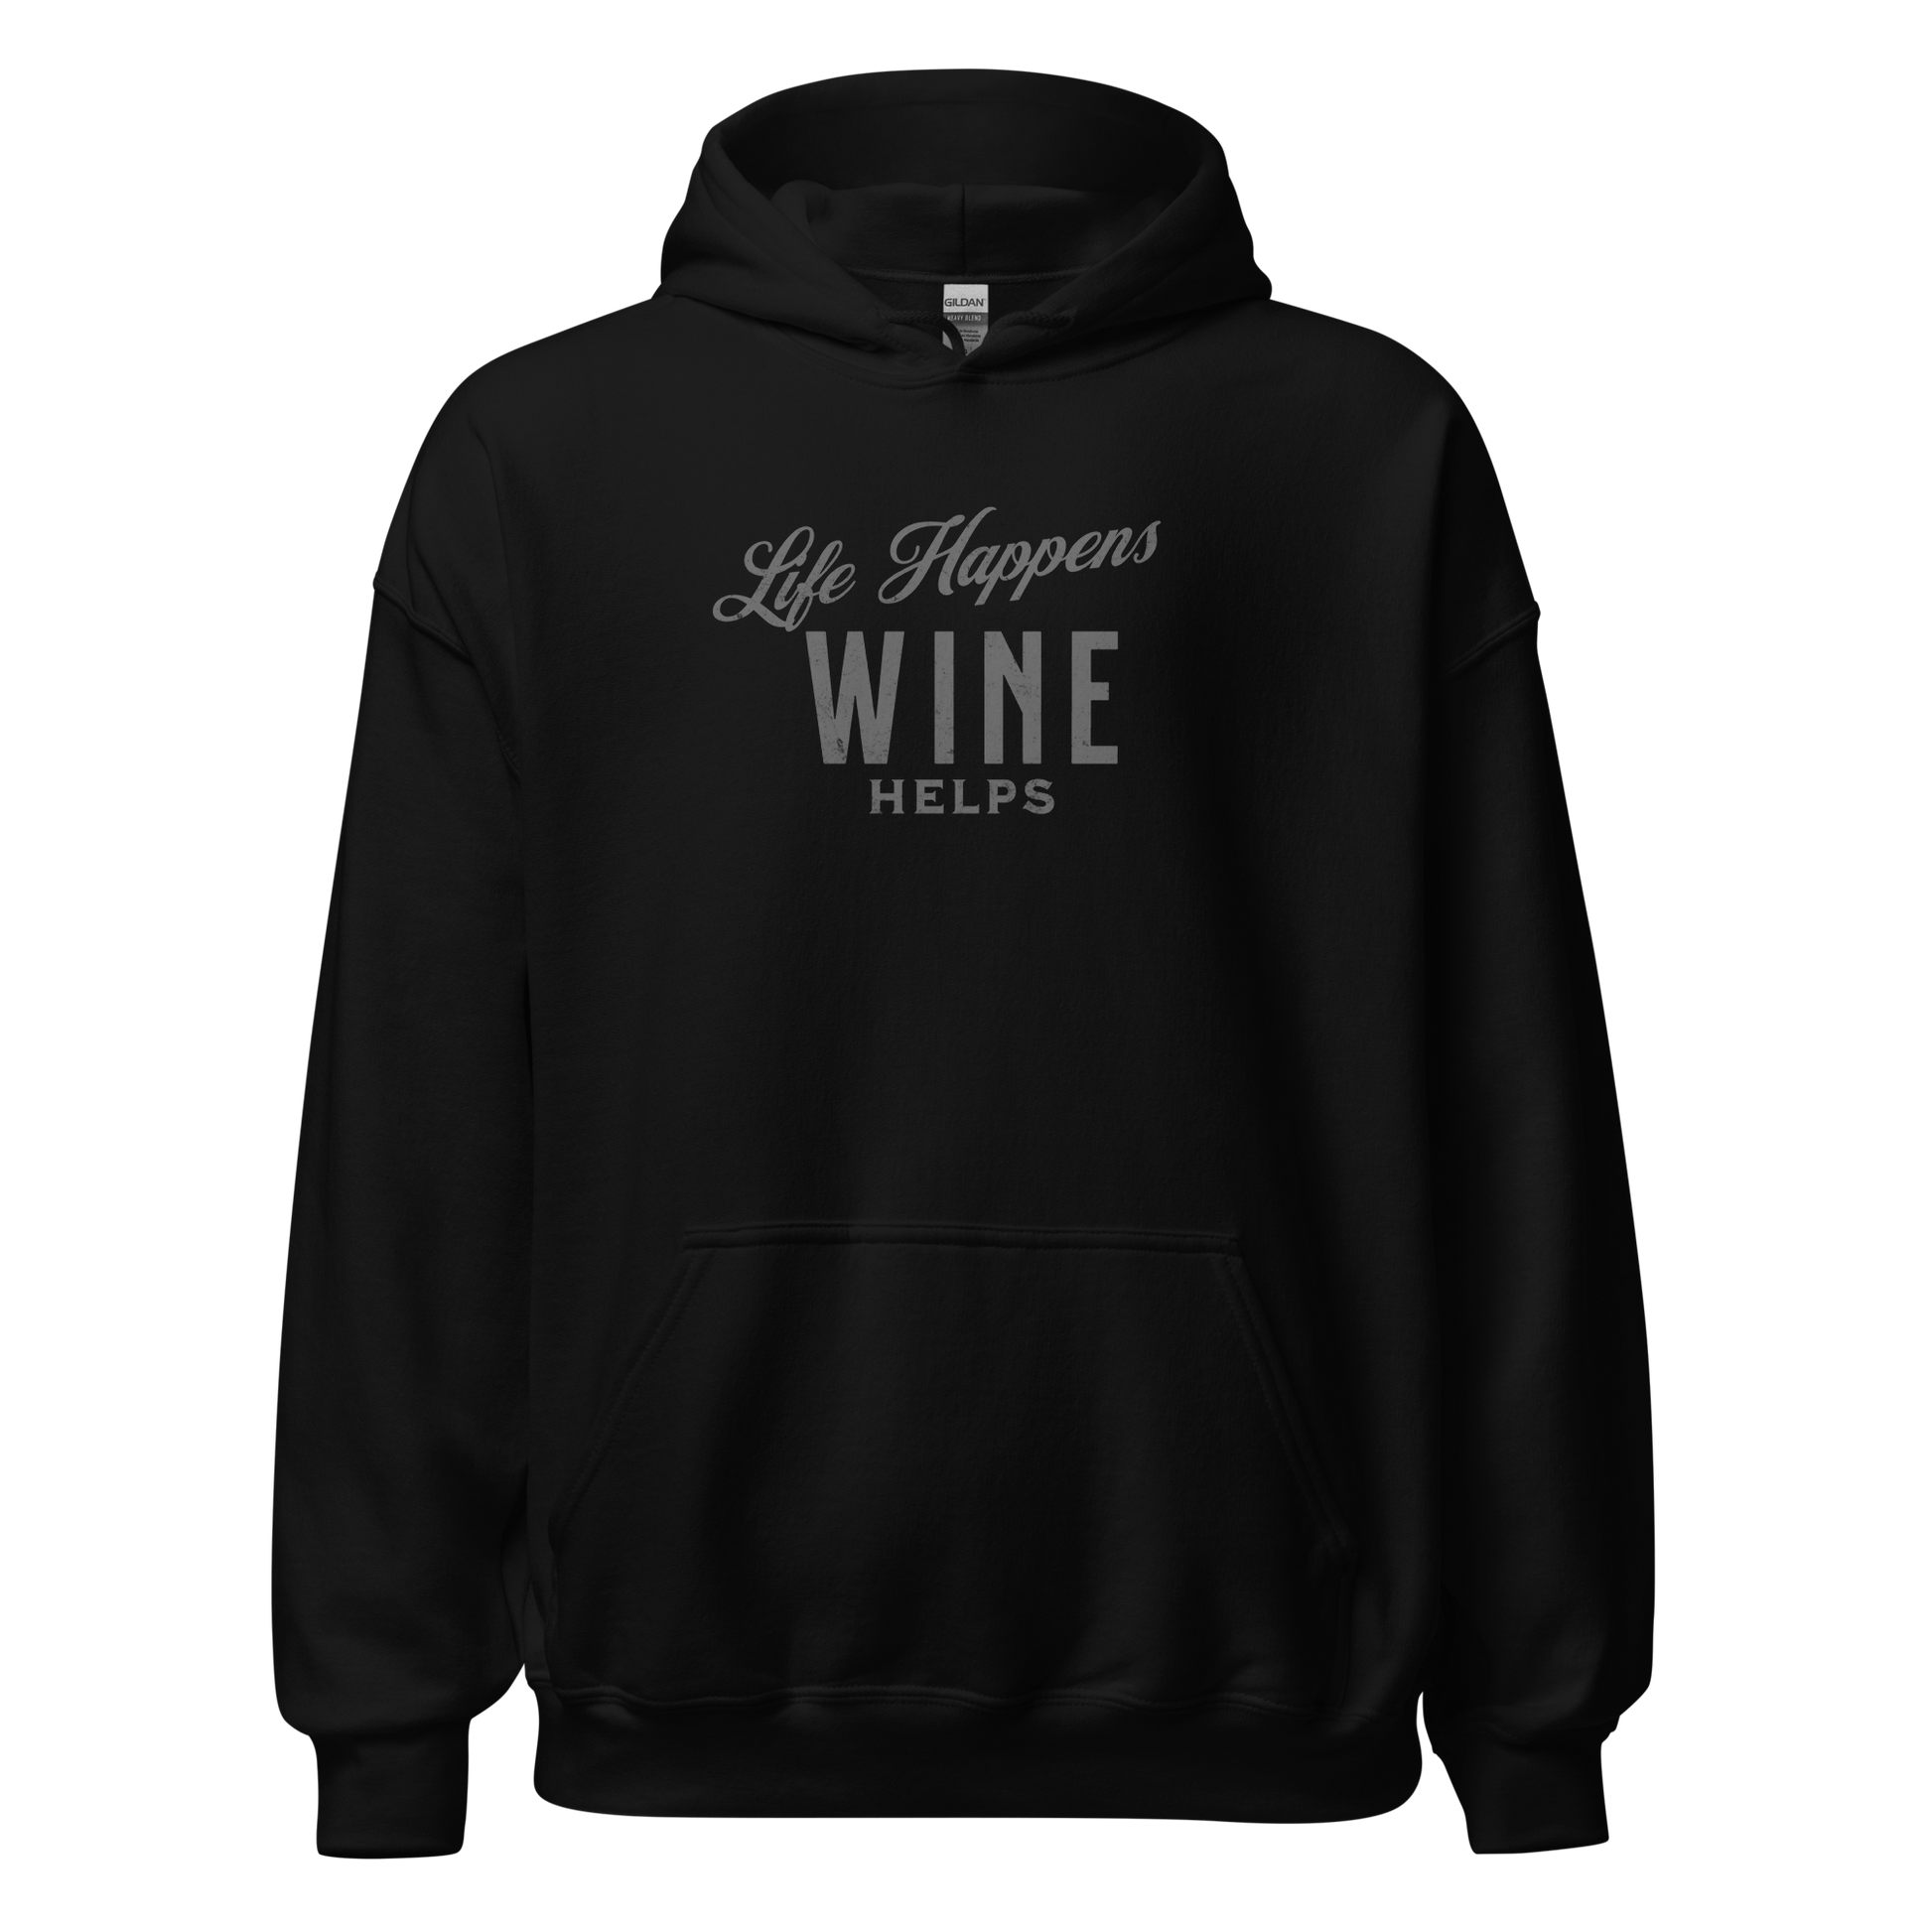 "Life Happens Wine Helps Hoodie - Cozy & Stylish""Find comfort & style in our 'Life Happens Wine Helps' Hoodie. Perfect for cooler evenings with a soft, smooth blend. Catch laughs & cozy vibes."